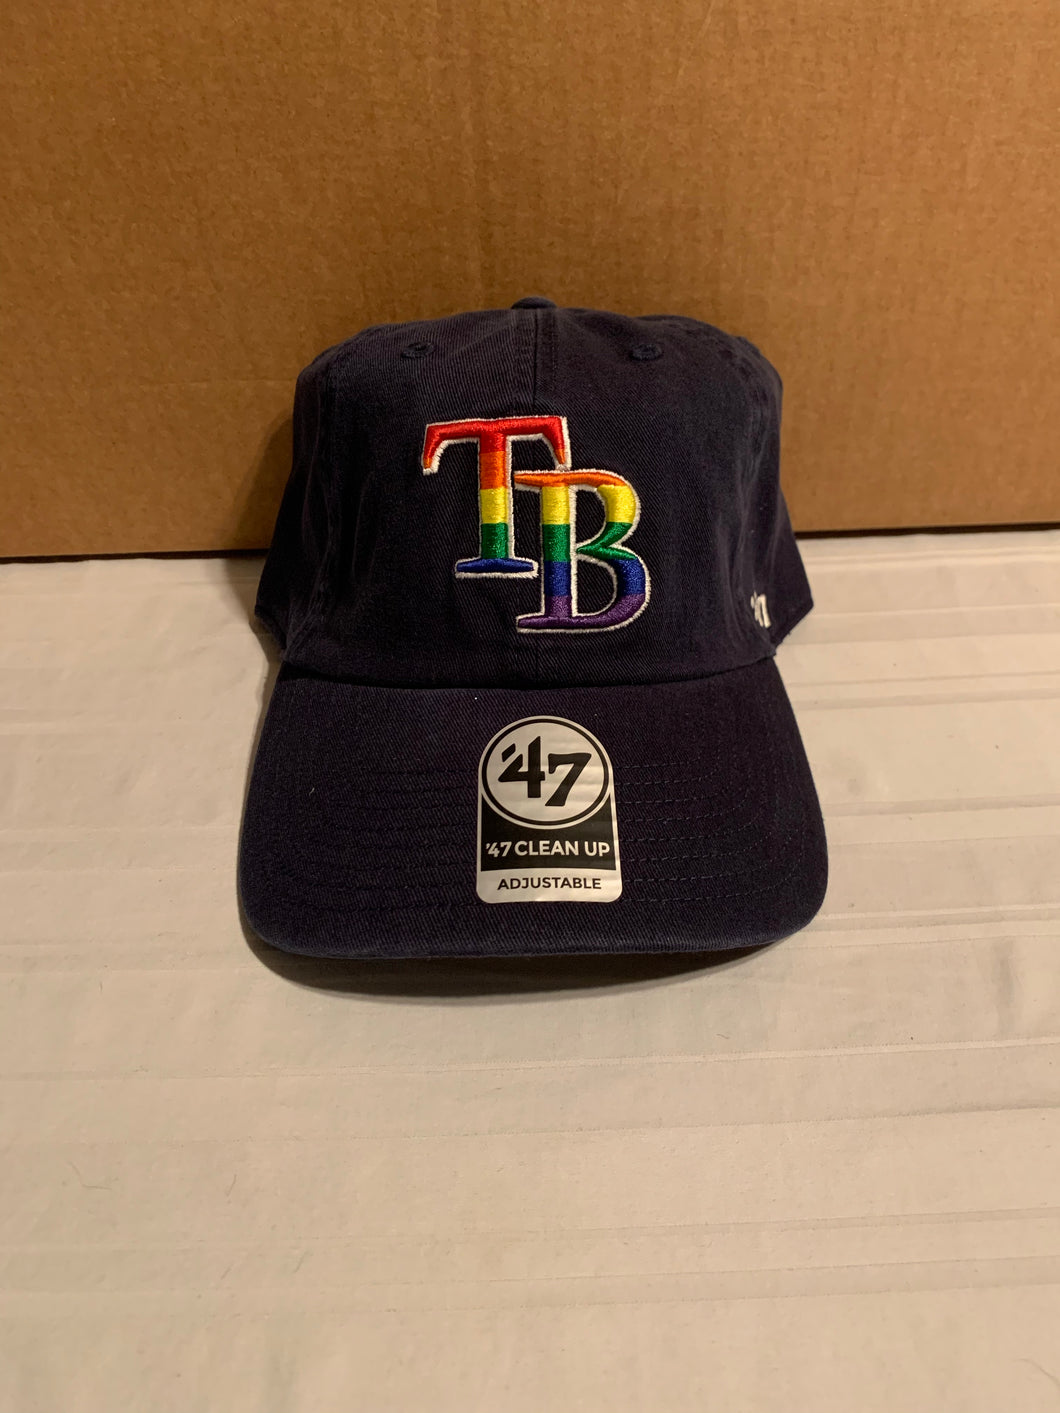 Tampa Bay Rays MLB '47 Brand Royal Pride Adjustable Clean Up Hat Cap - Casey's Sports Store